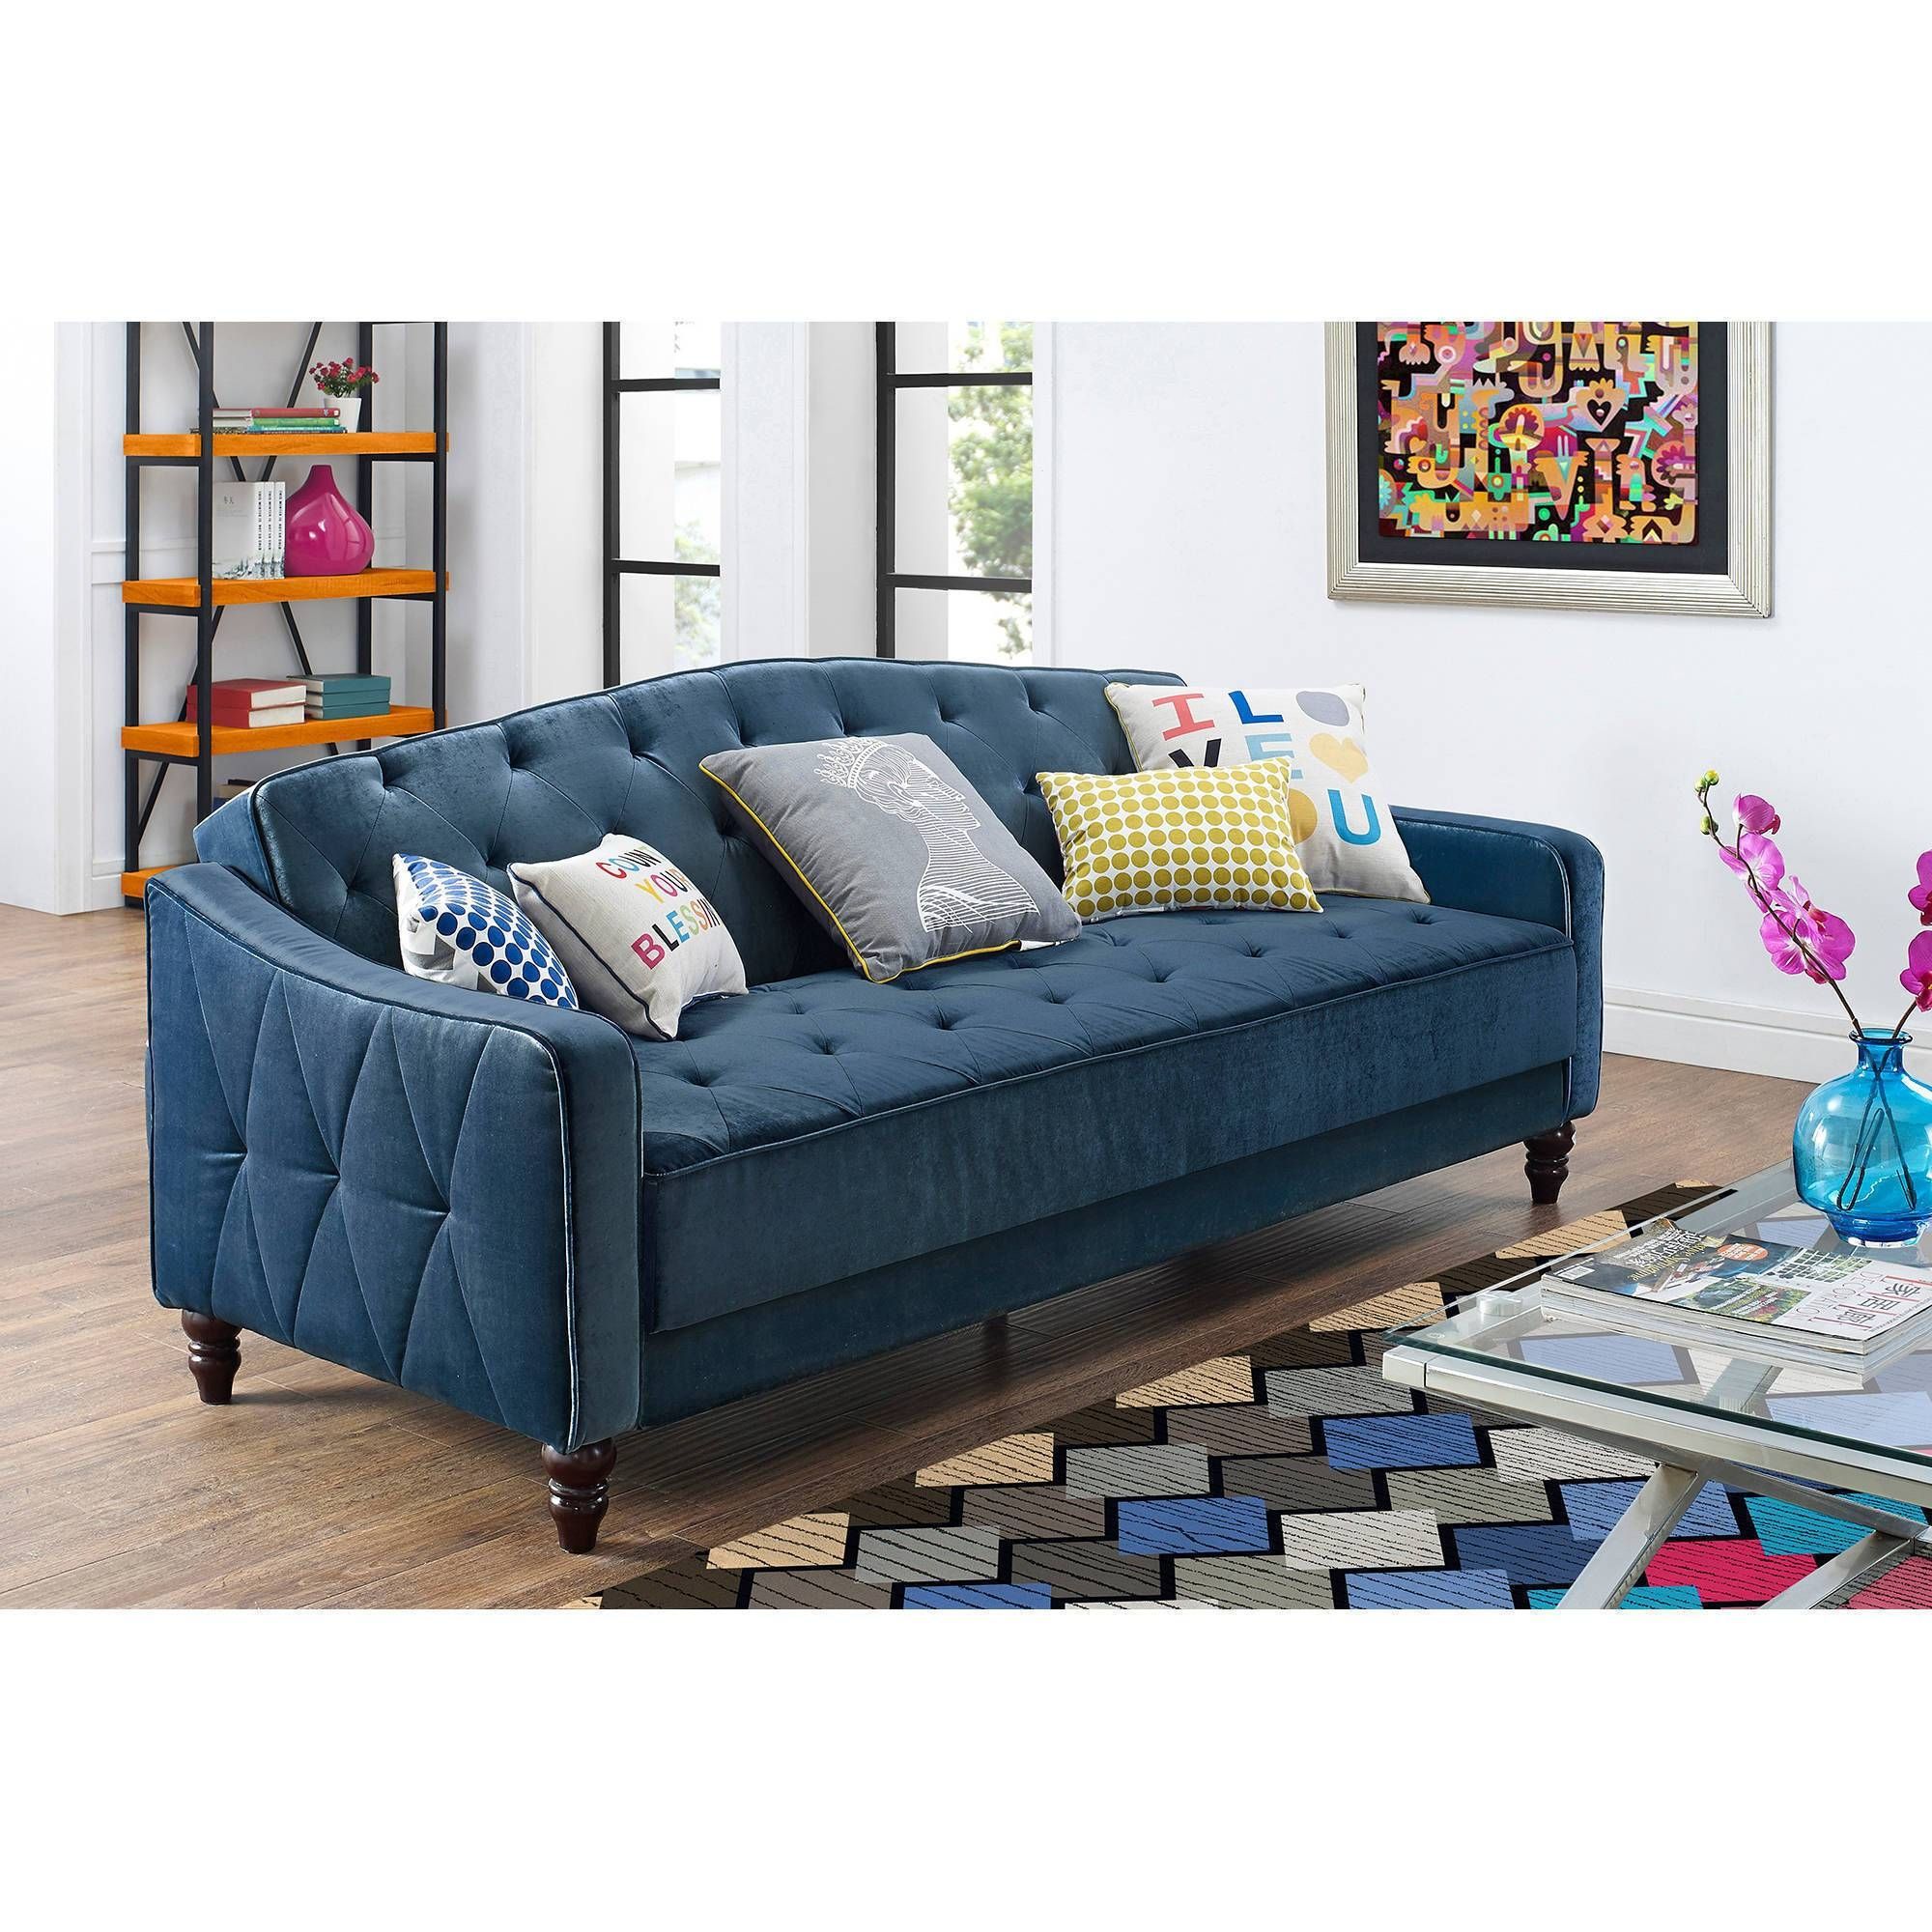 Coaster Company Black Accent Lounge Chair Futon Sofa Bed – Walmart Regarding Sofa Lounger Beds (View 25 of 30)